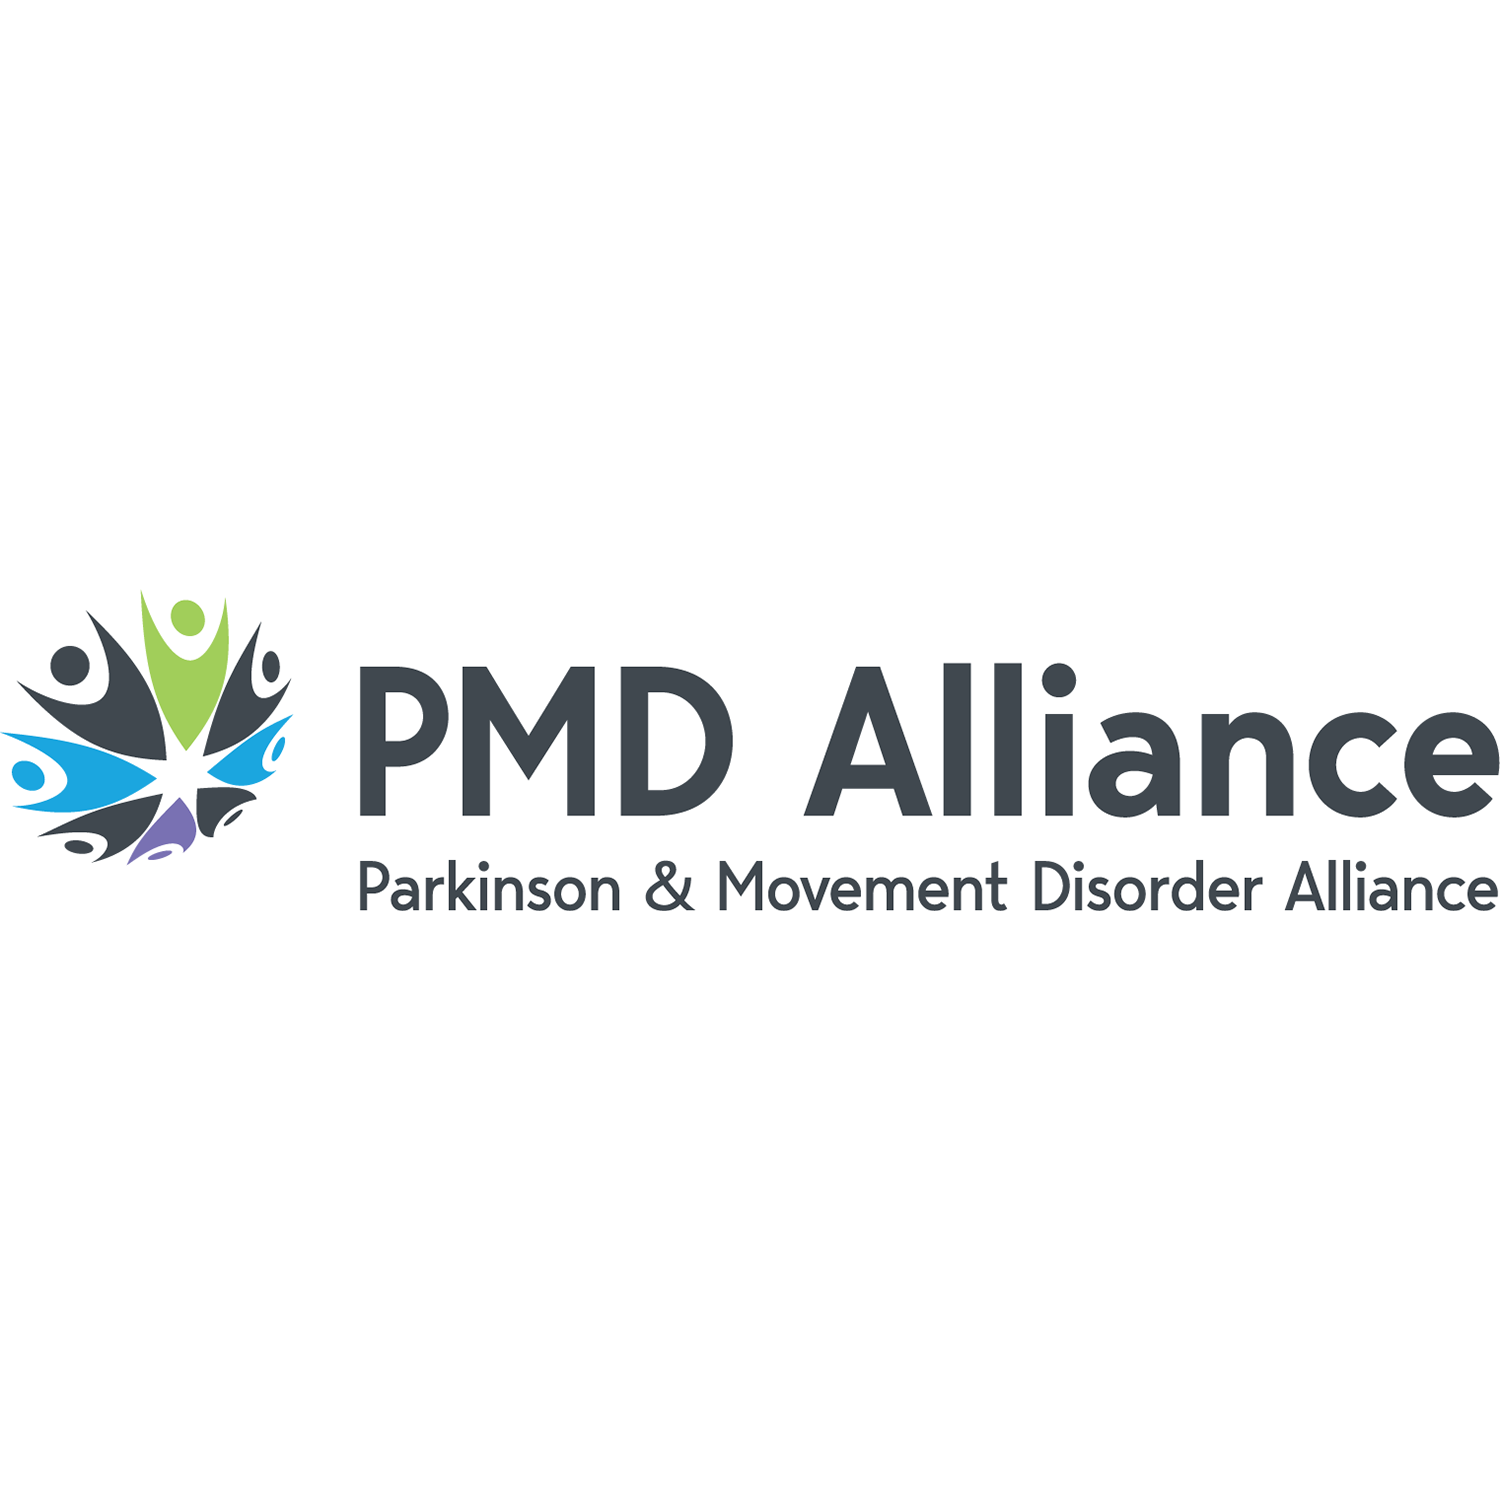 The Alliances Align: PMD Alliance to Acquire Parkinson Alliance’s Patient-Centric Research Portfolio and Launch Margaret Tuchman Resource Library 